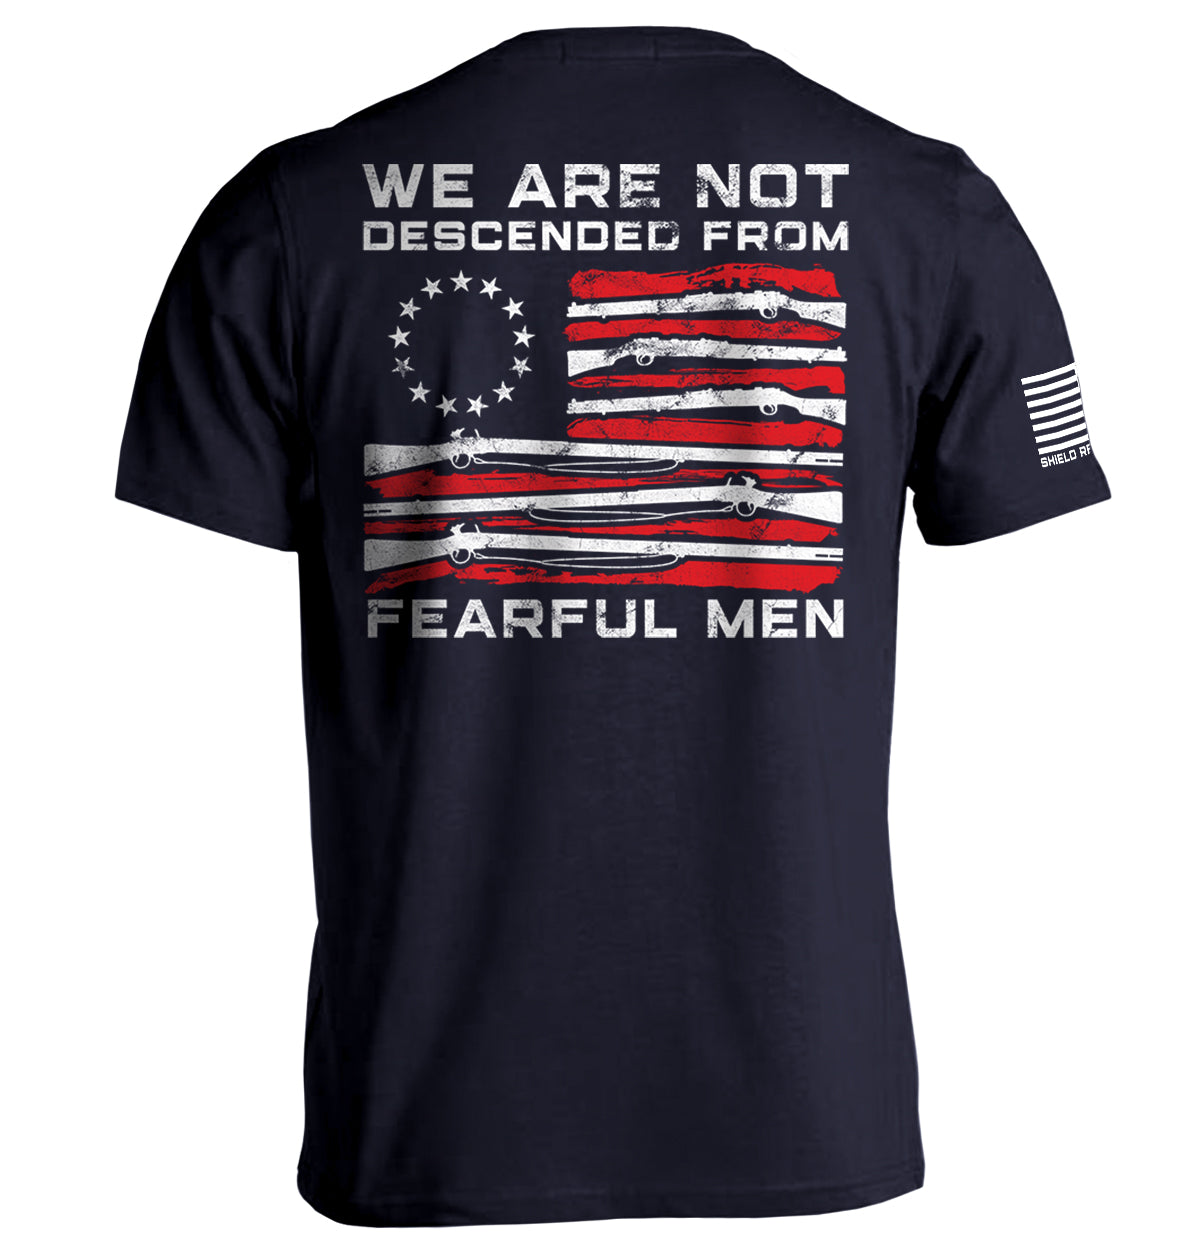 We Are Not Descended From Fearful Men Tee